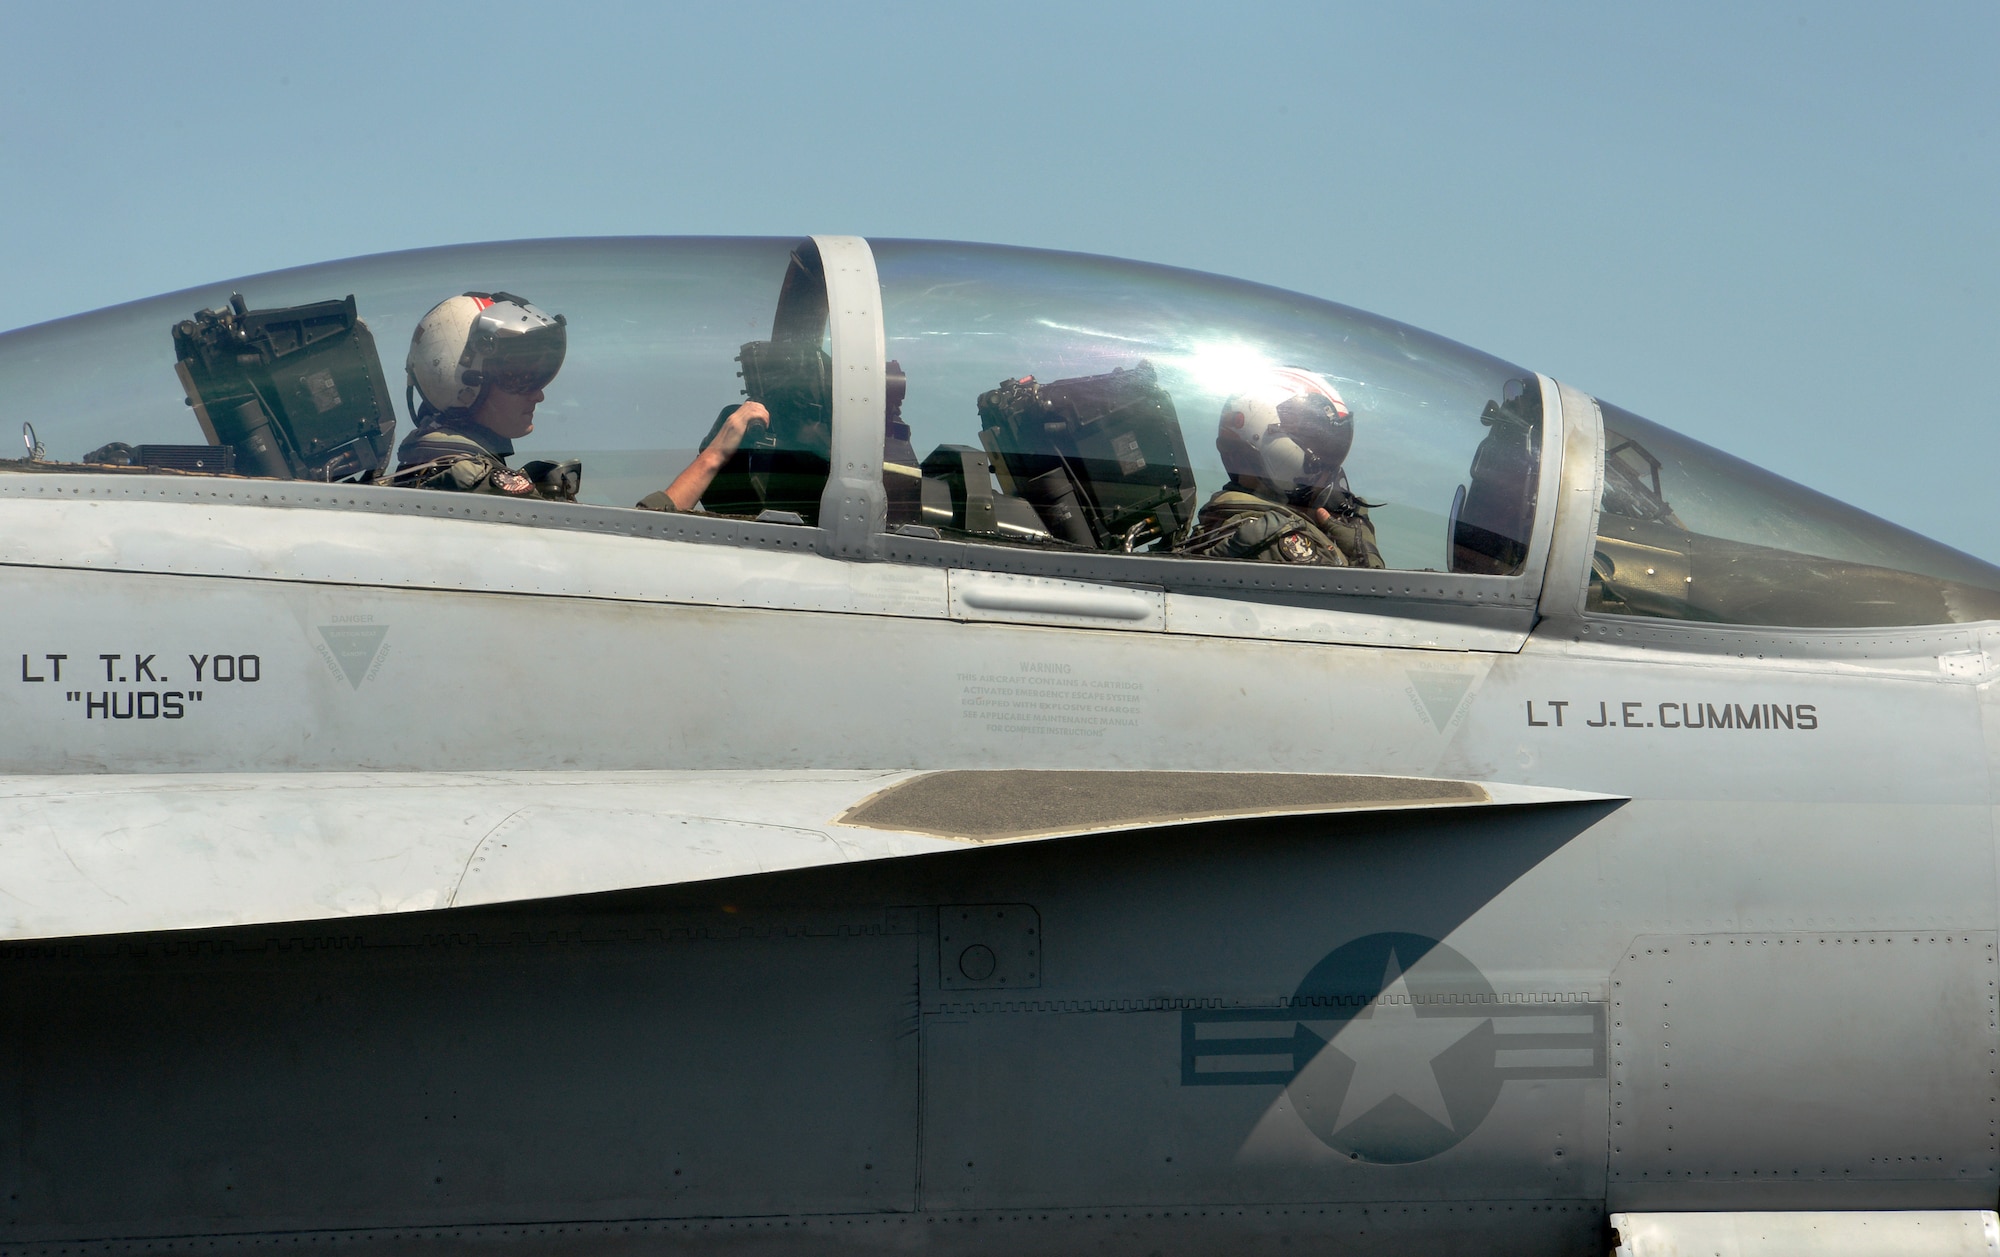 A U.S. Navy F-18F Super Hornet from VFA-41 squadron, based out of Naval Air Station Lemoore, Calif., prepares for an afternoon sortie at the Portland Air National Guard Base, Portland, Ore., during dissimilar aircraft combat training (DACT) on Aug. 13, 2019. The two-week training exercise from Aug. 11-23 provides realistic combat scenarios for pilots to hone advanced aerial tactics used against potential adversaries. (U.S. Air National Guard photo by Master Sgt. John Hughel)